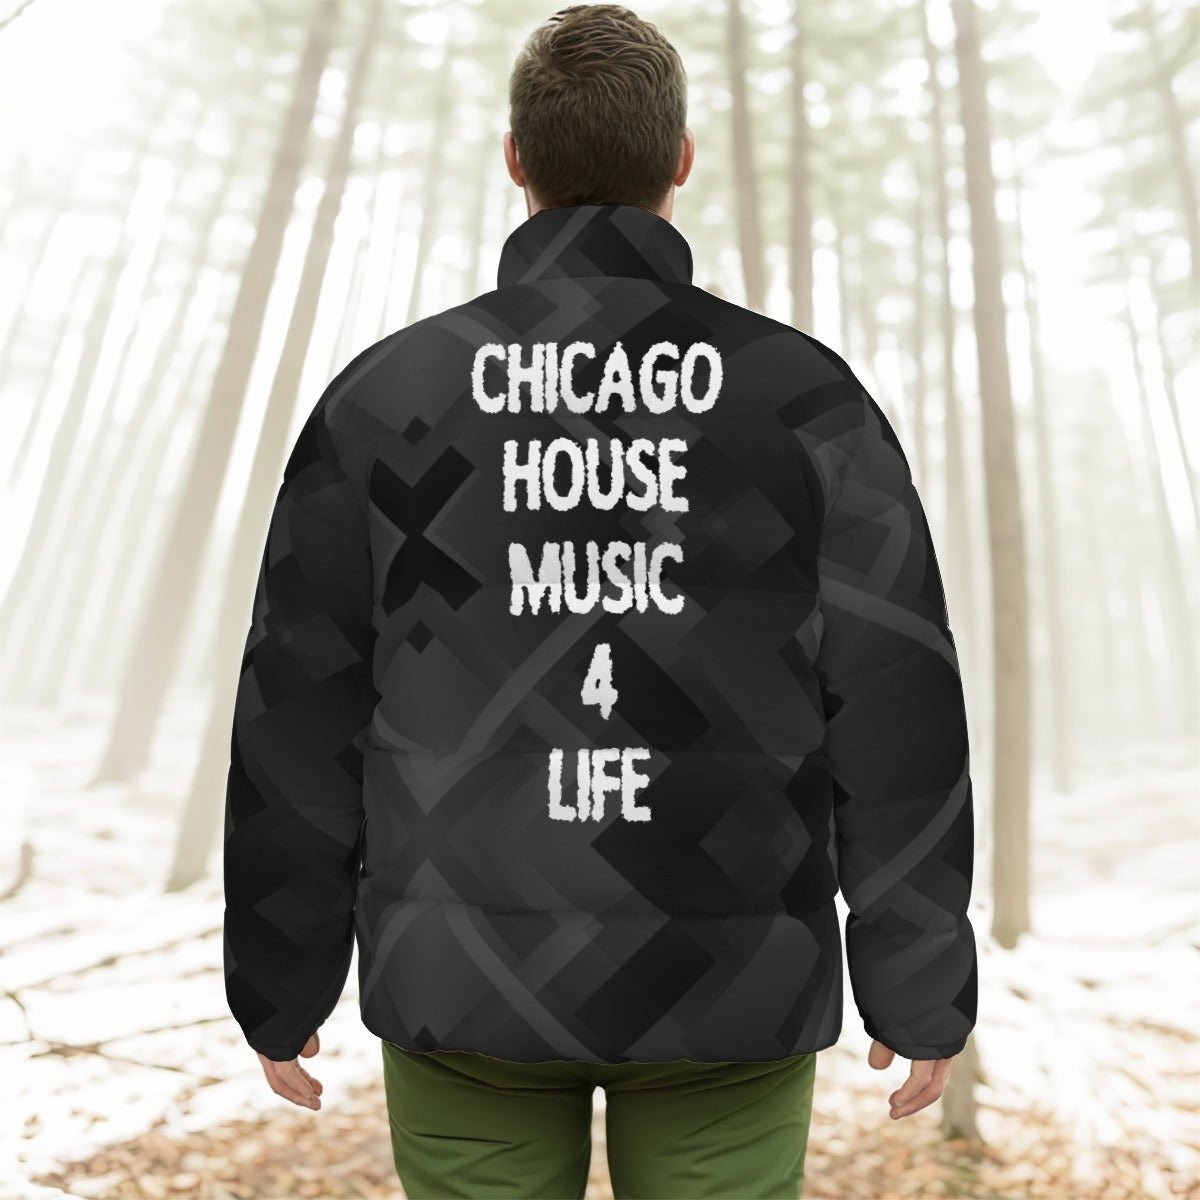 Farris Wheel Puffer Winter Jacket "Chicago House Music 4 Life" - BeExtra! Apparel & More